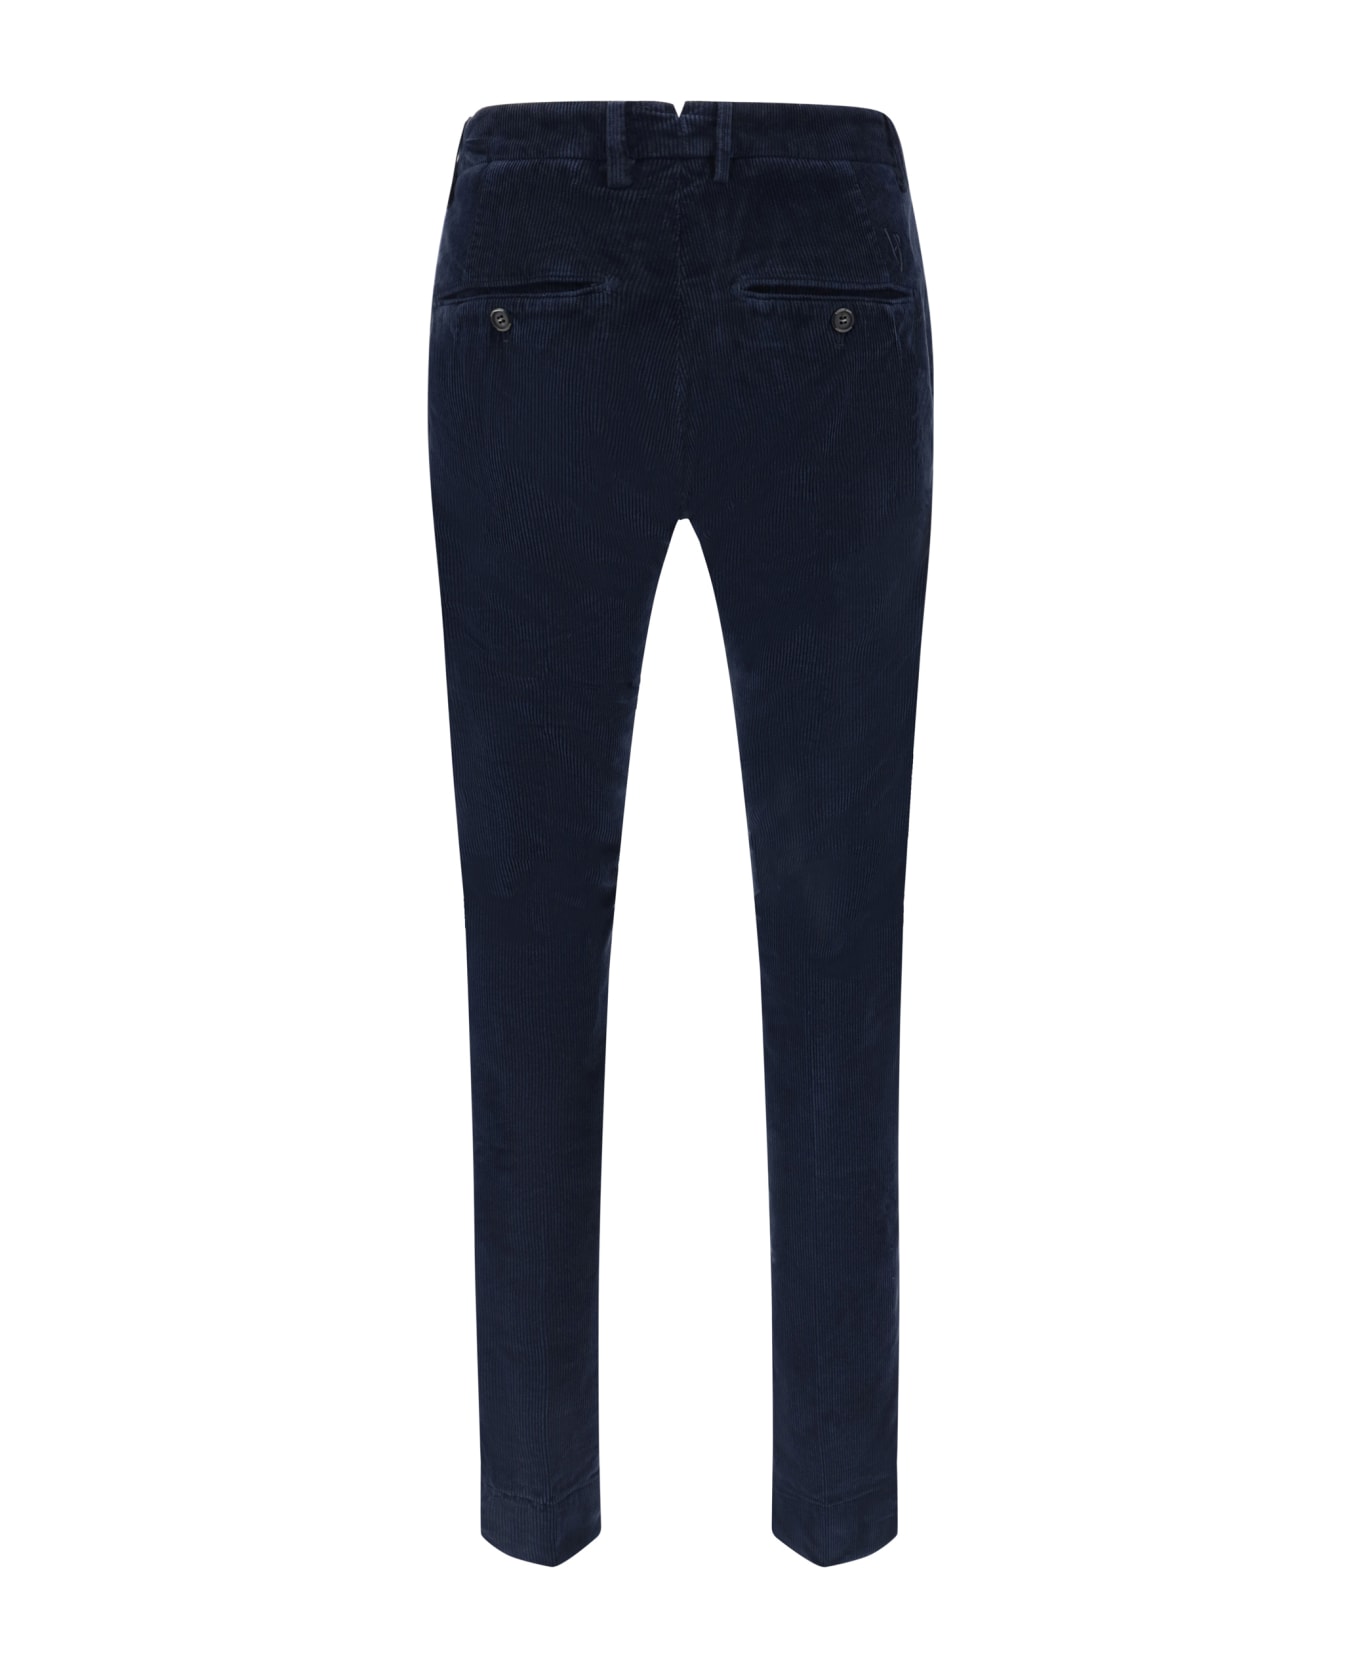 Hand Picked Pants - Blu Scuro